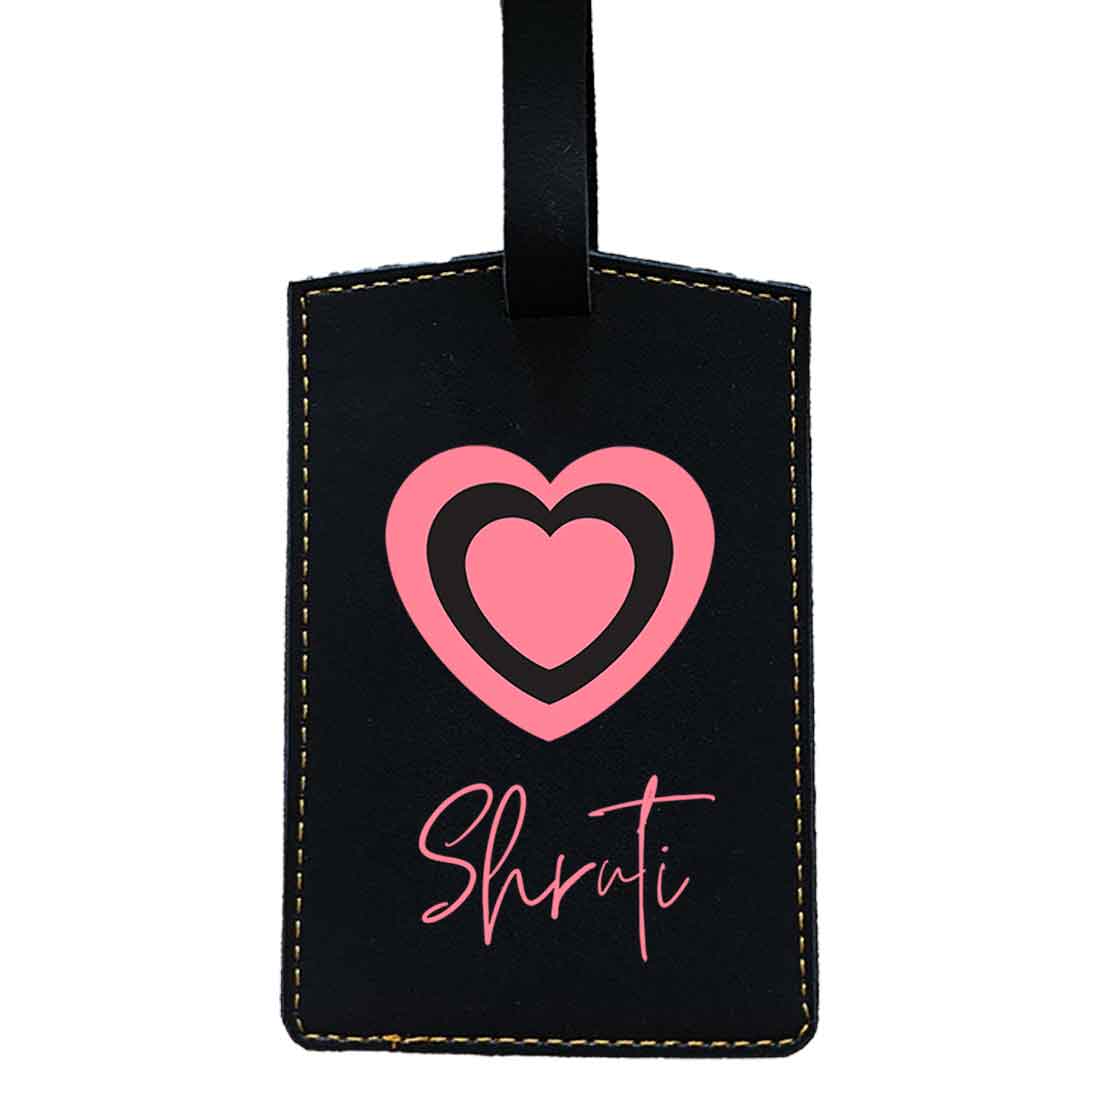 Shop Personalized Name Tags for Bags Online – Nutcase